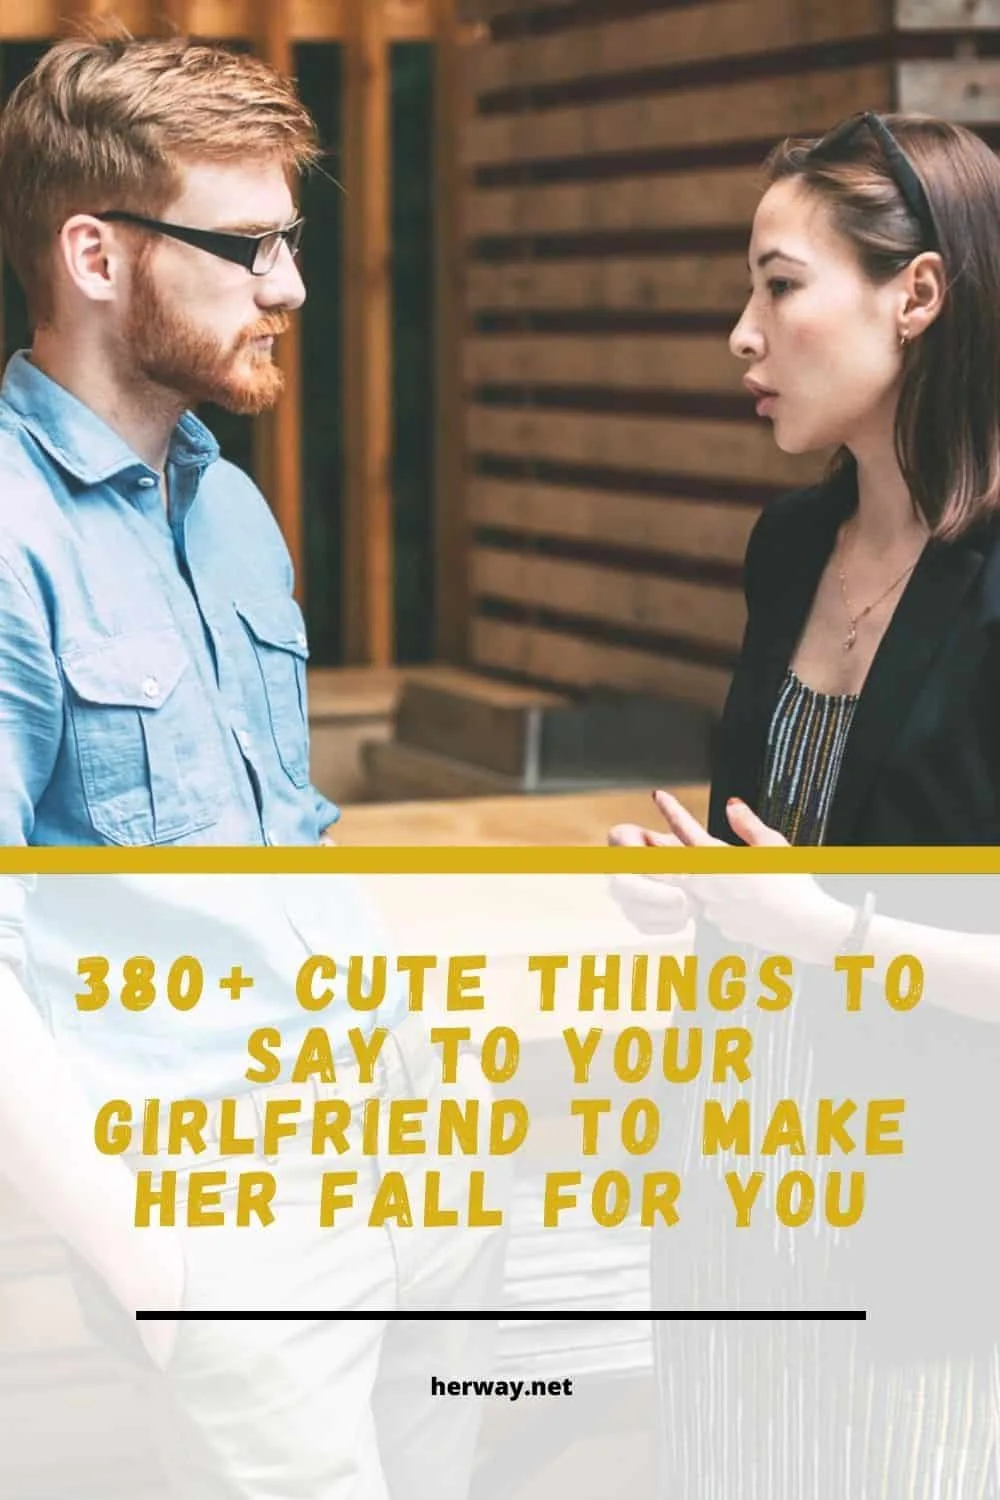 380+ Cute Things To Say To Your Girlfriend To Make Her Fall For You